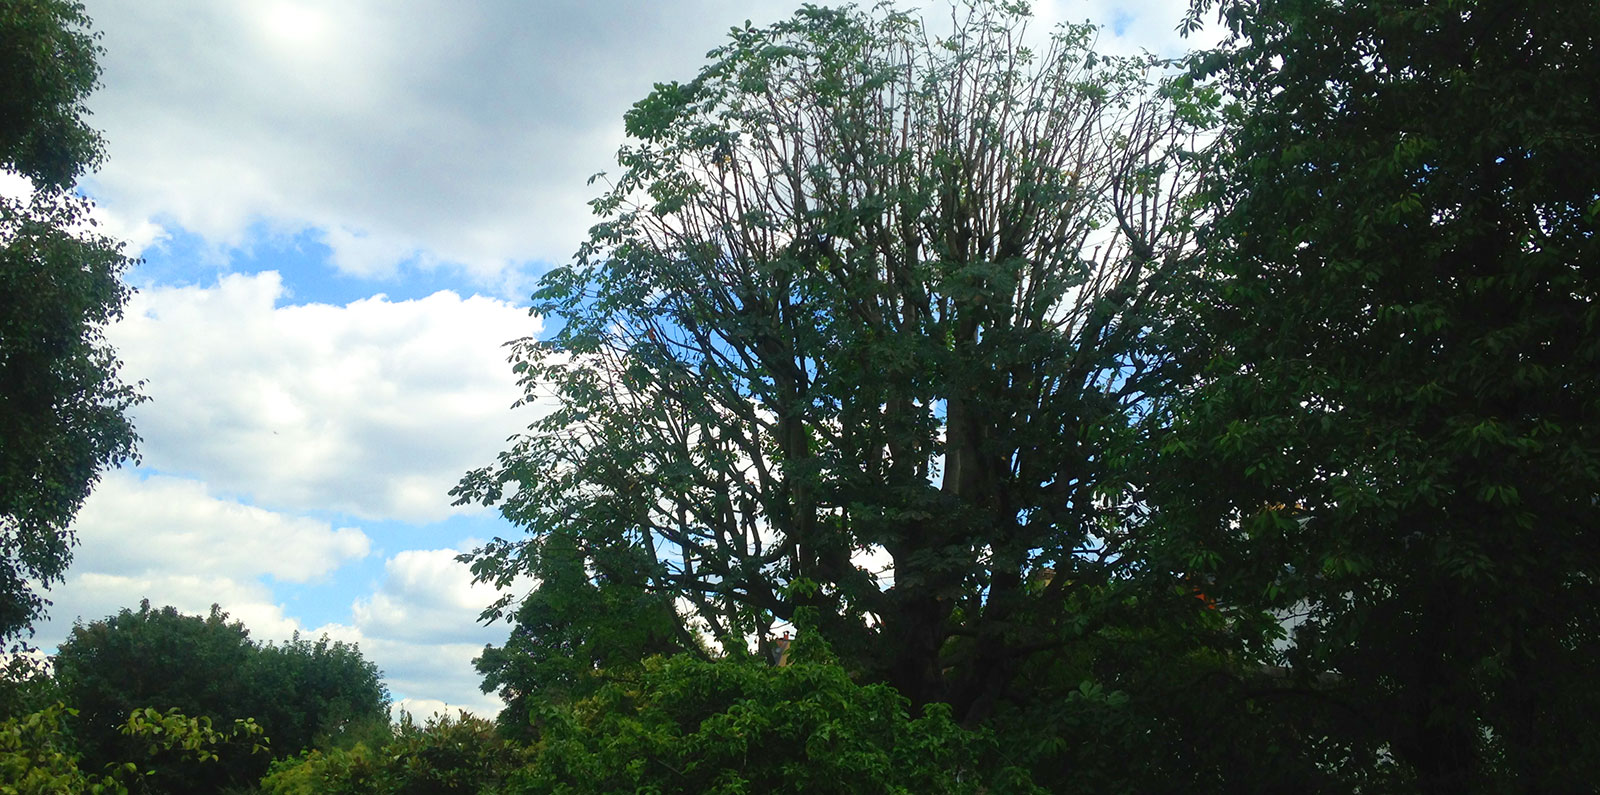 Crown Thinning of Horse Chestnut by Benton Tree Surgeons